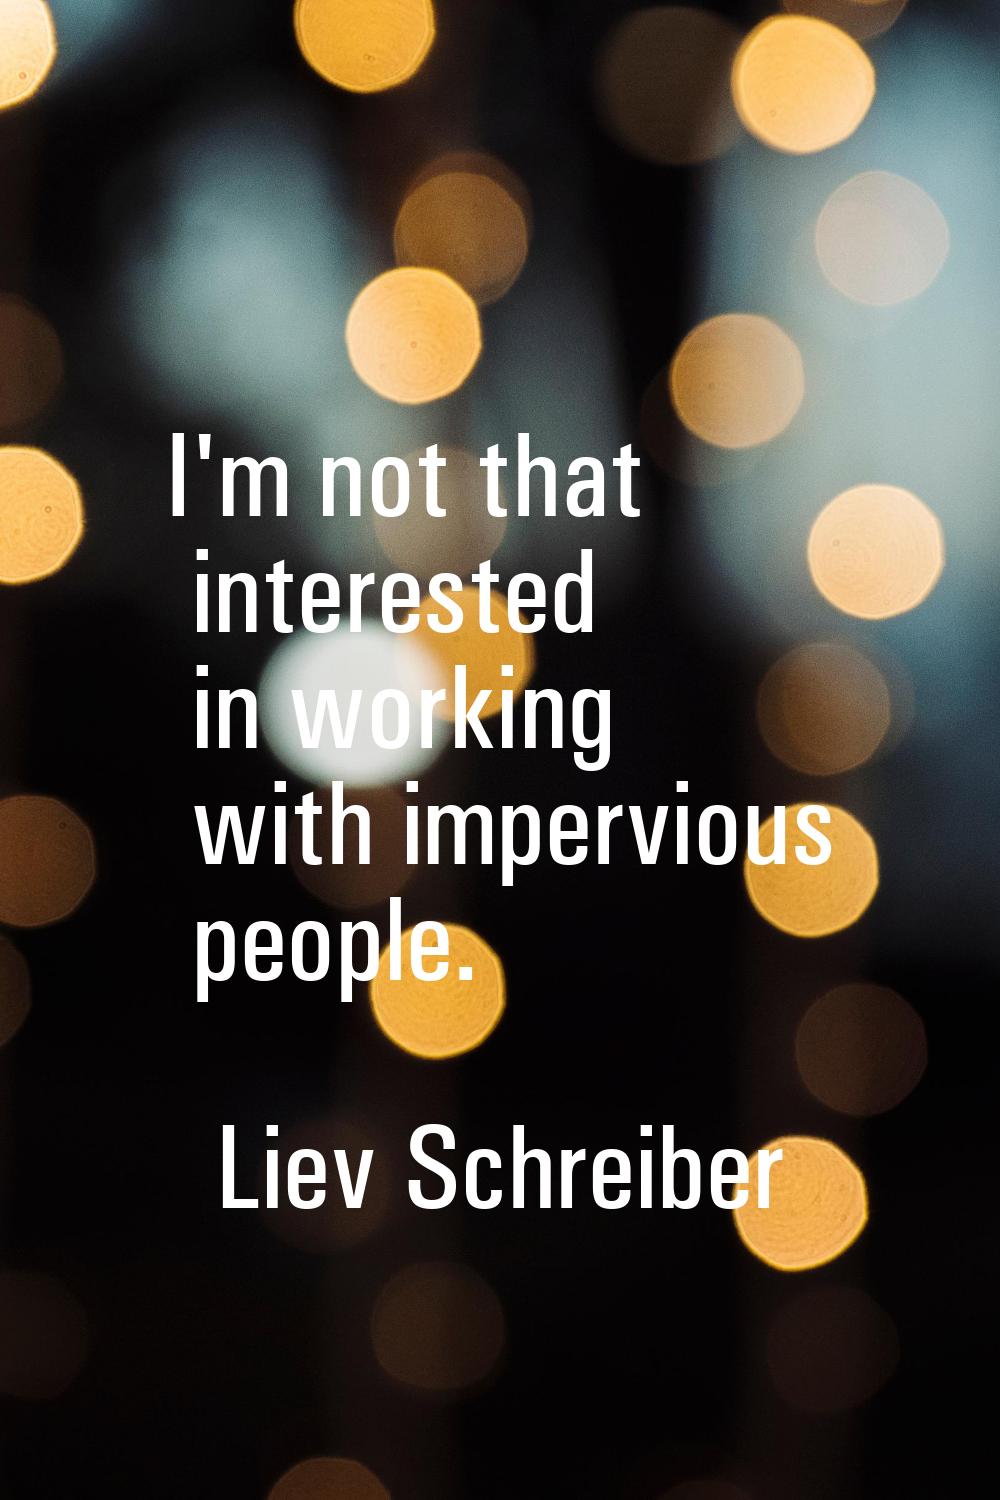 I'm not that interested in working with impervious people.